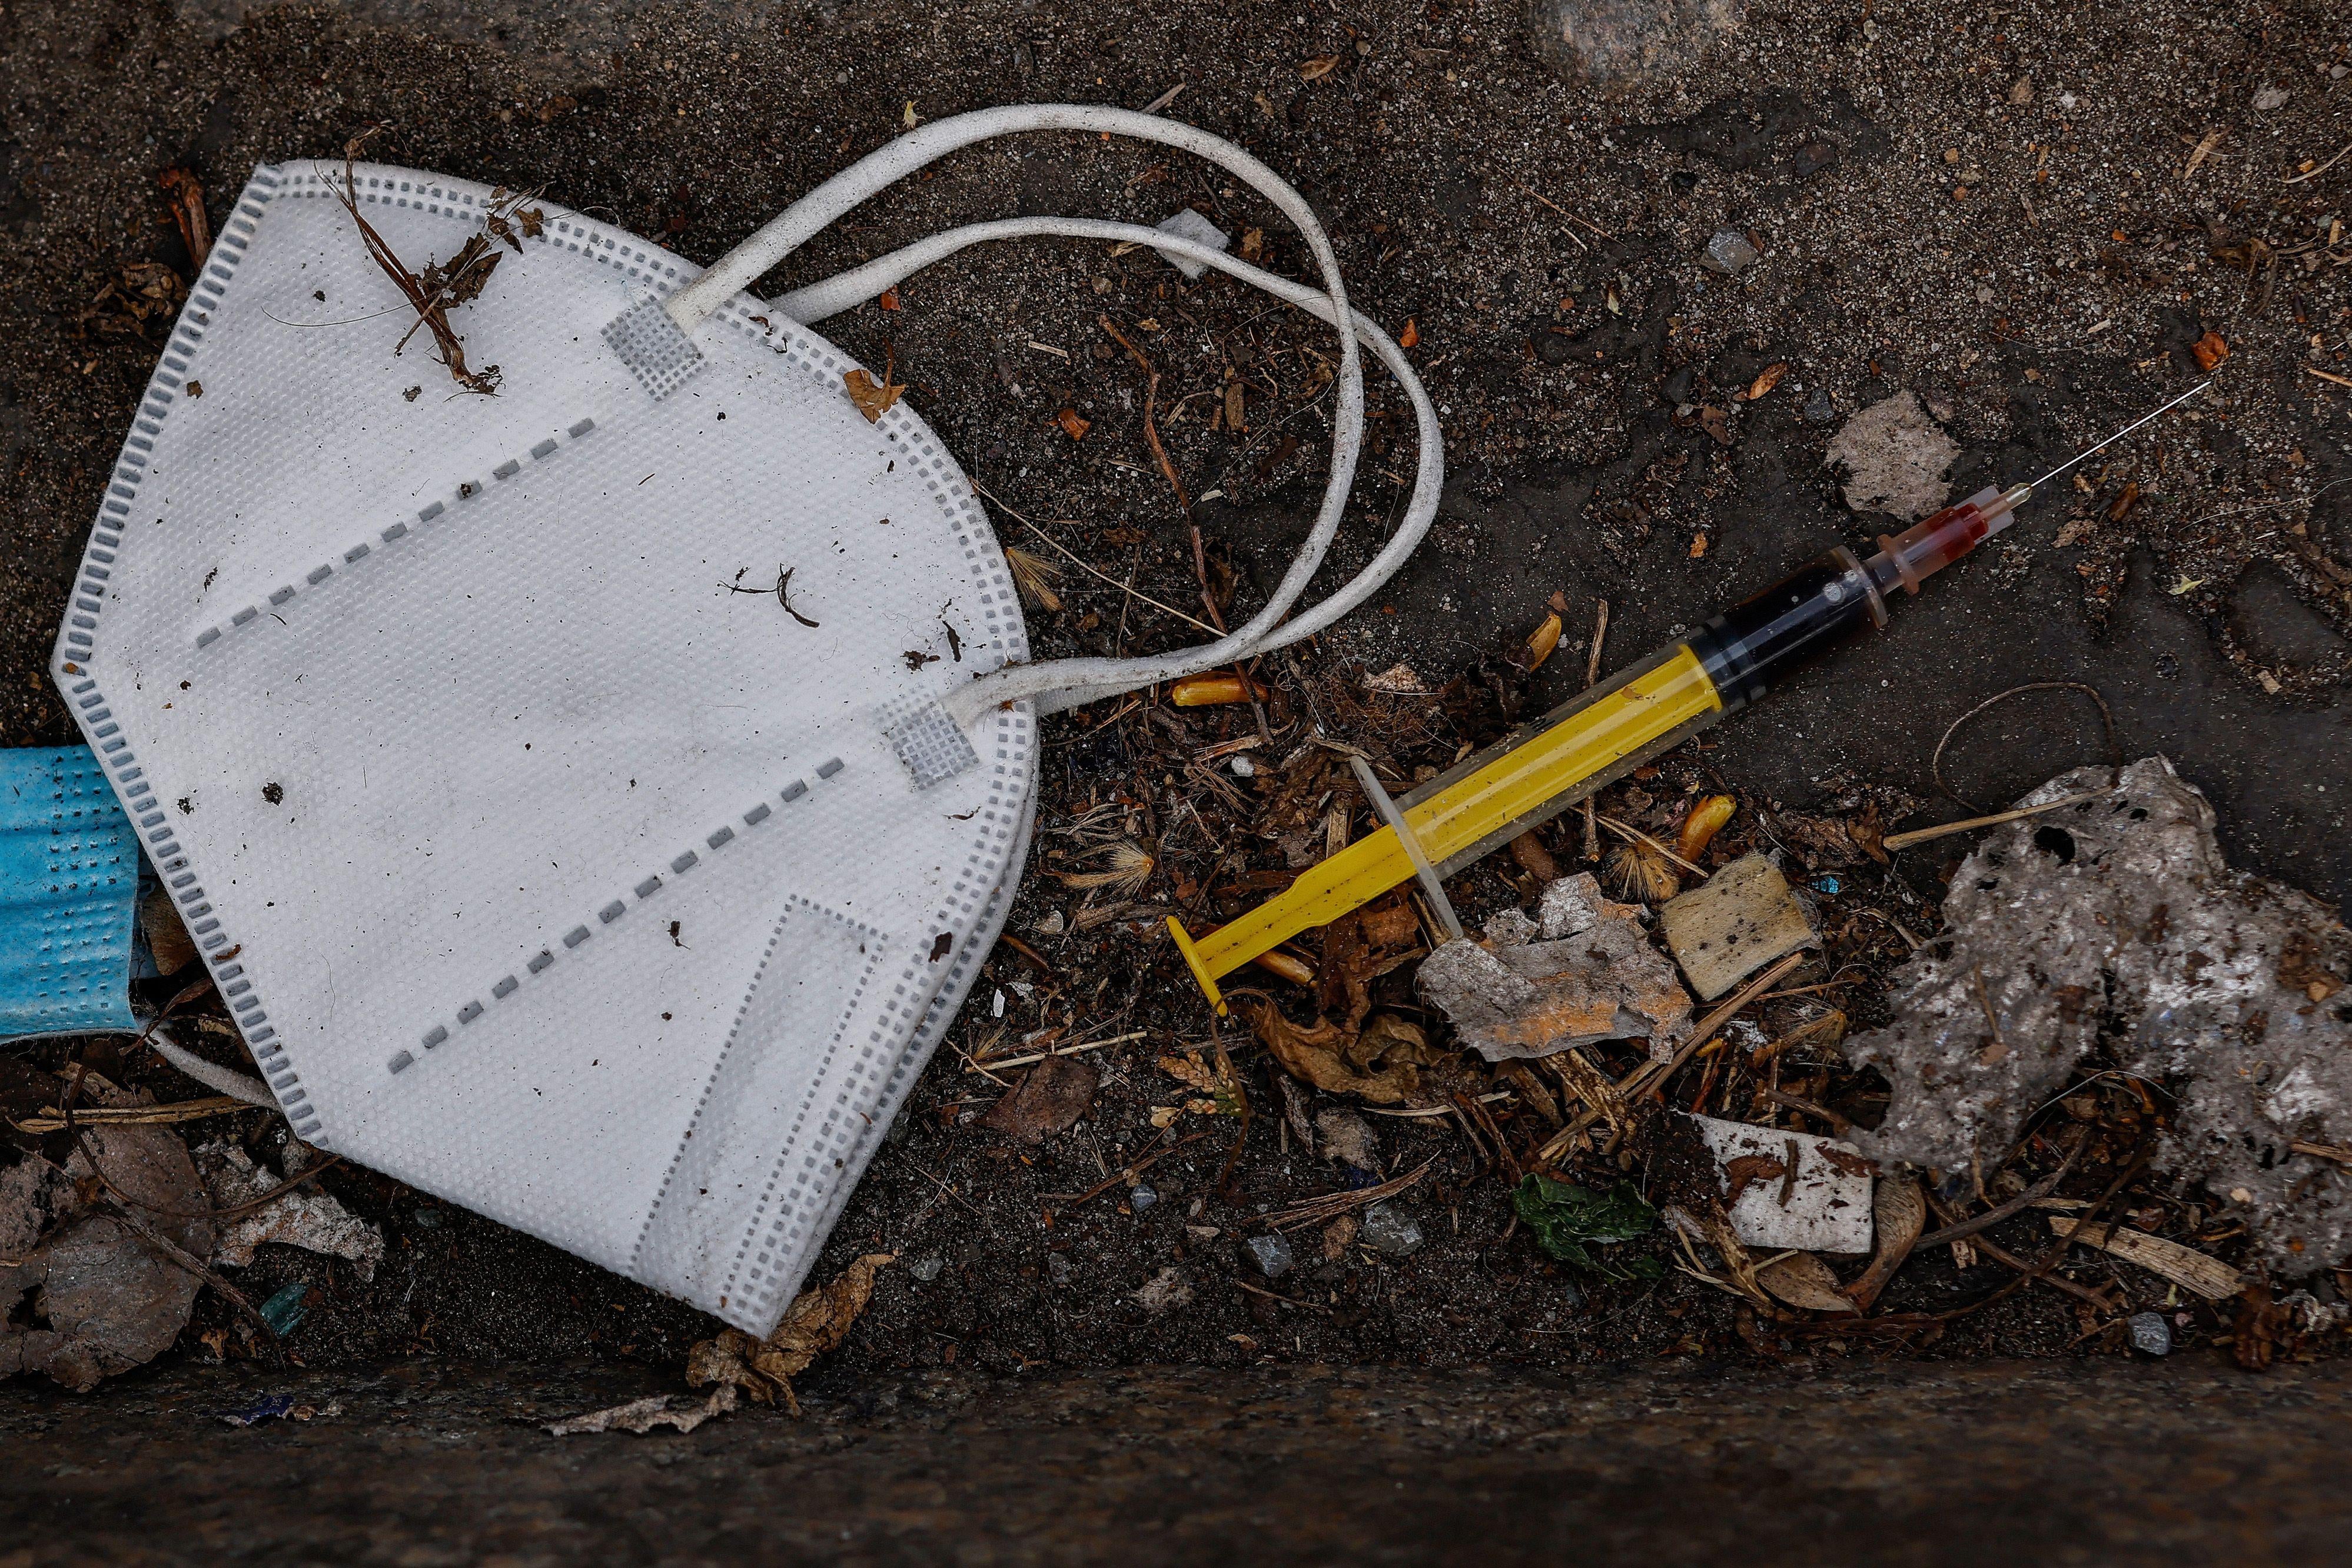 A mask and a syringe are seen on the ground.